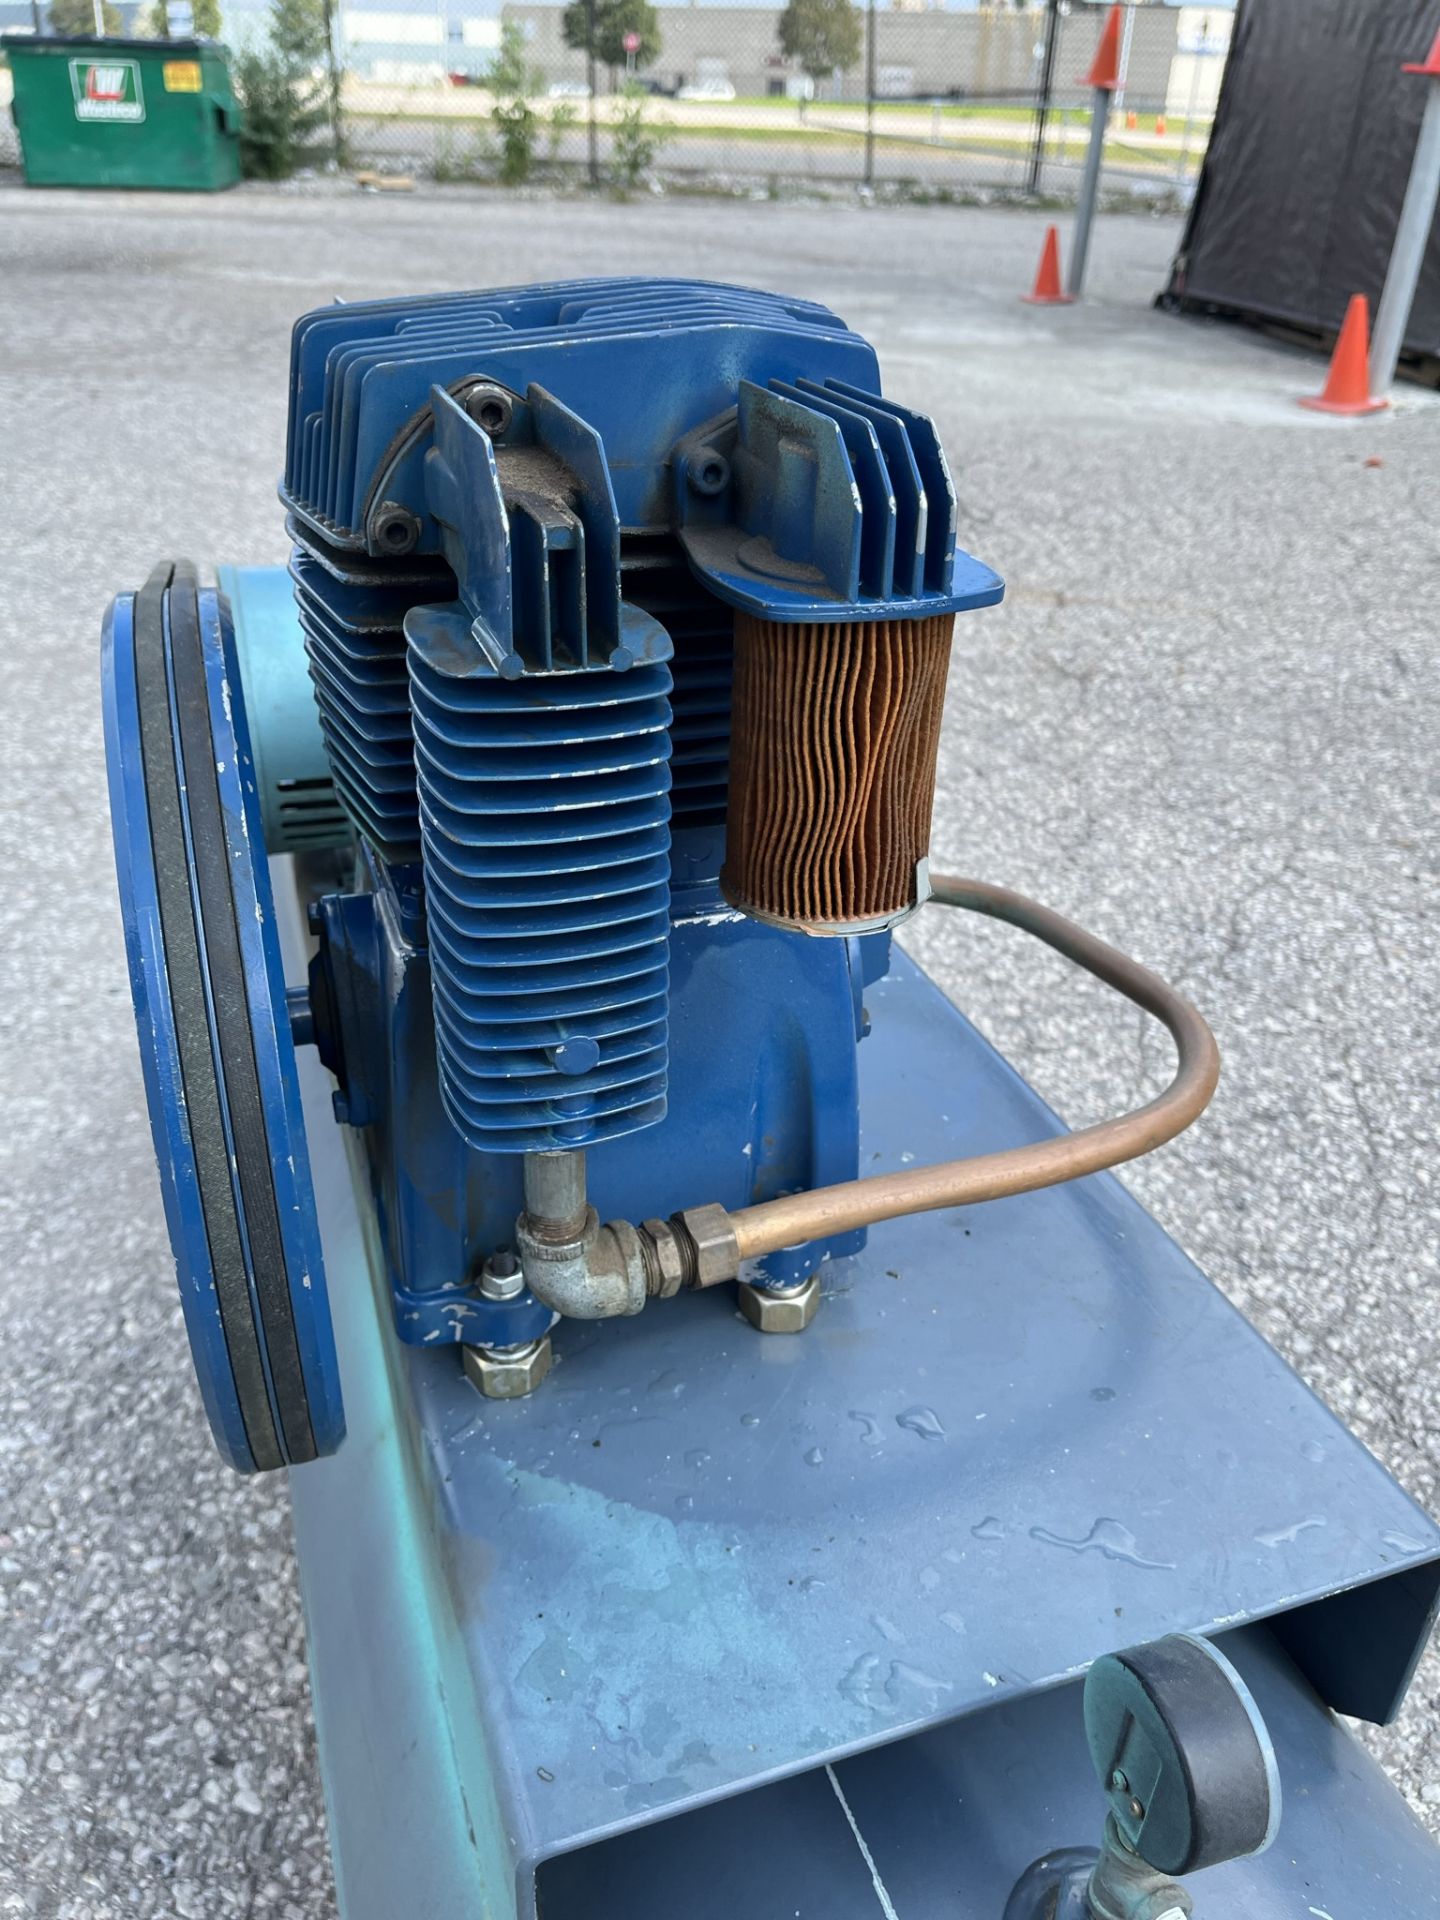 1986 Blue Mountain Air Compressor - Image 7 of 10